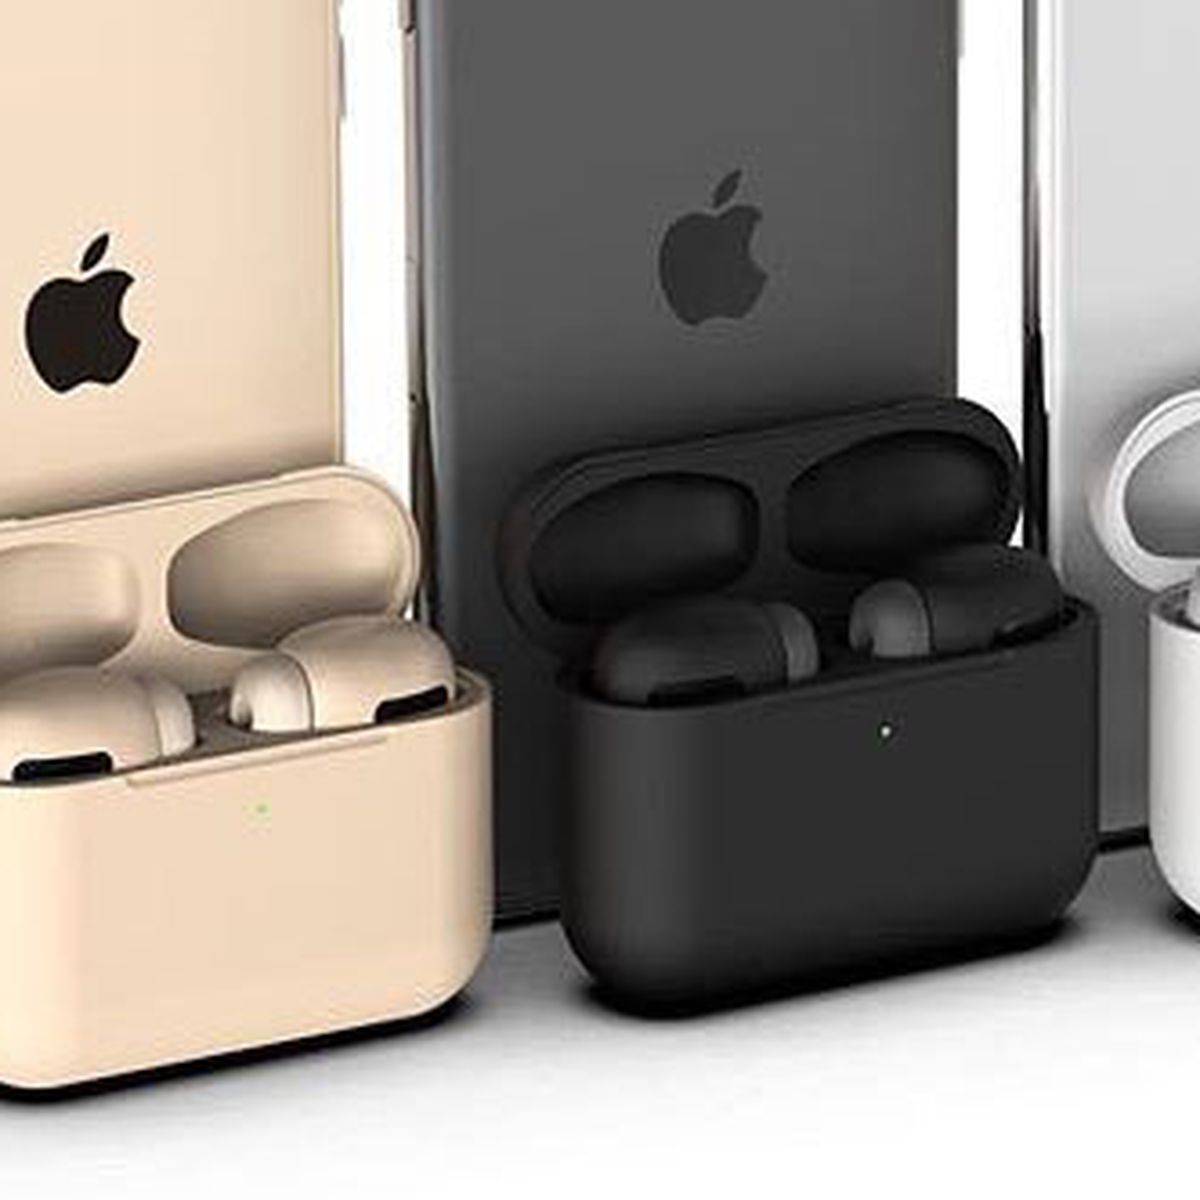 AirPods Pro to Feature New Colors, Black and Midnight Green, According to Chinese Report - MacRumors